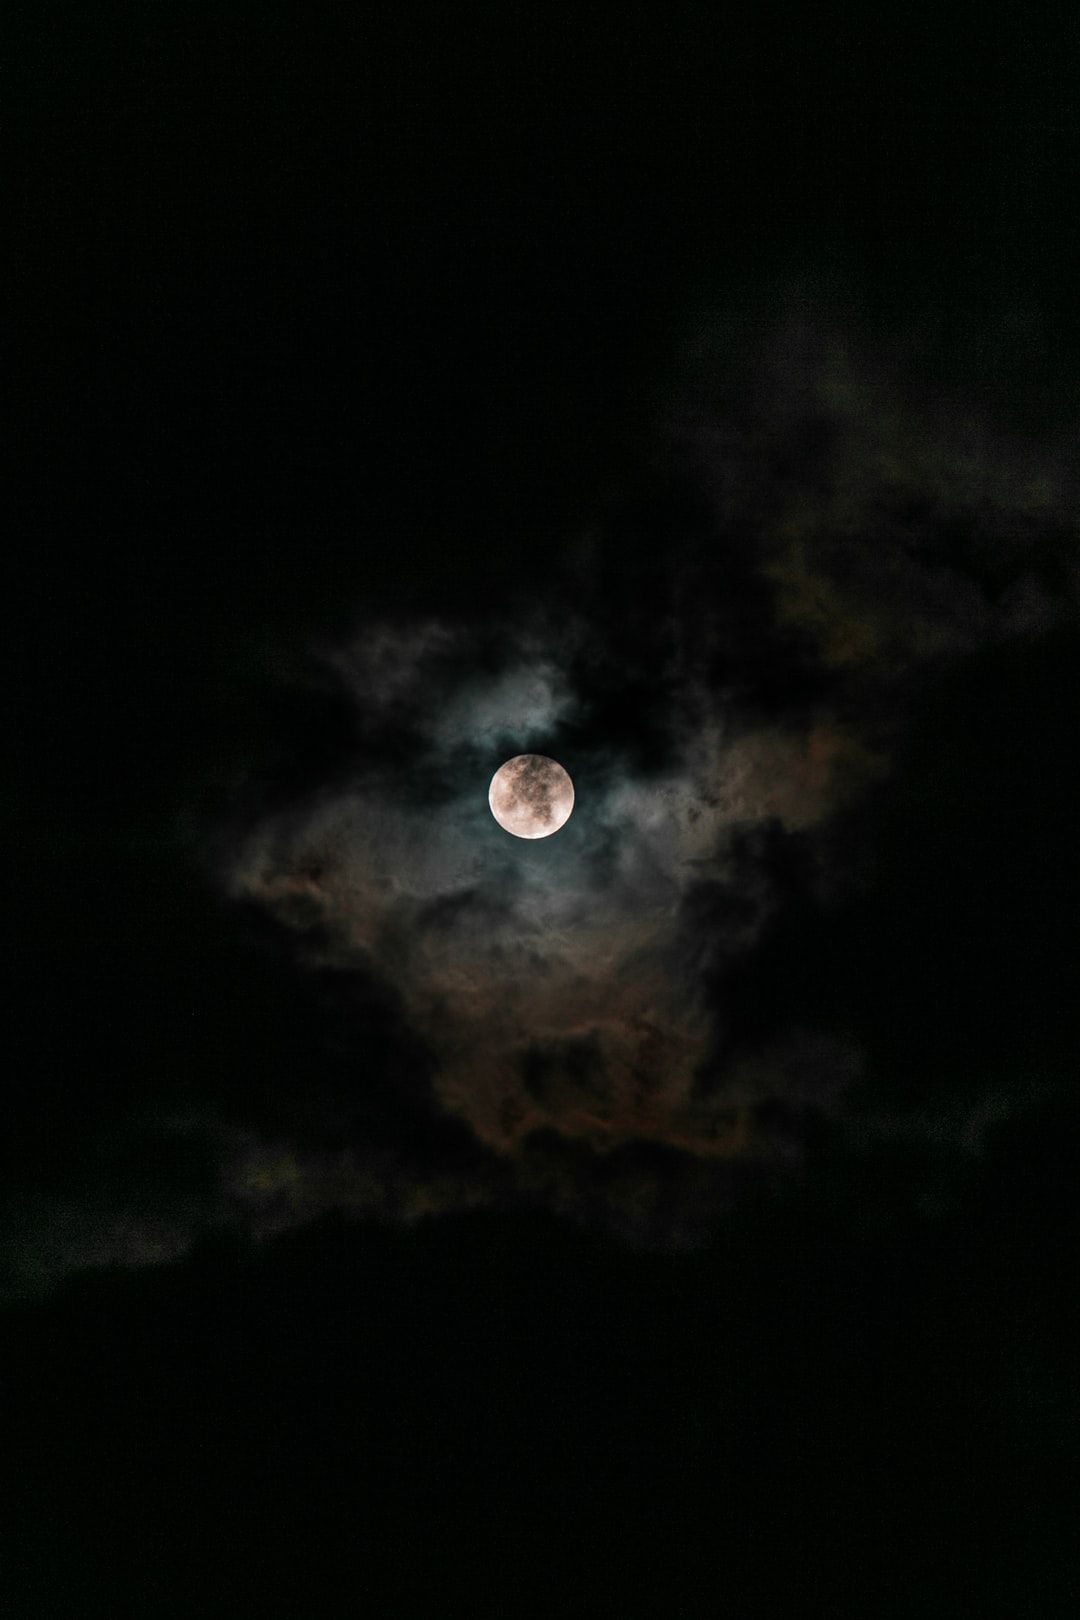 IPhone wallpaper of a full moon with clouds in the night sky. - Moon